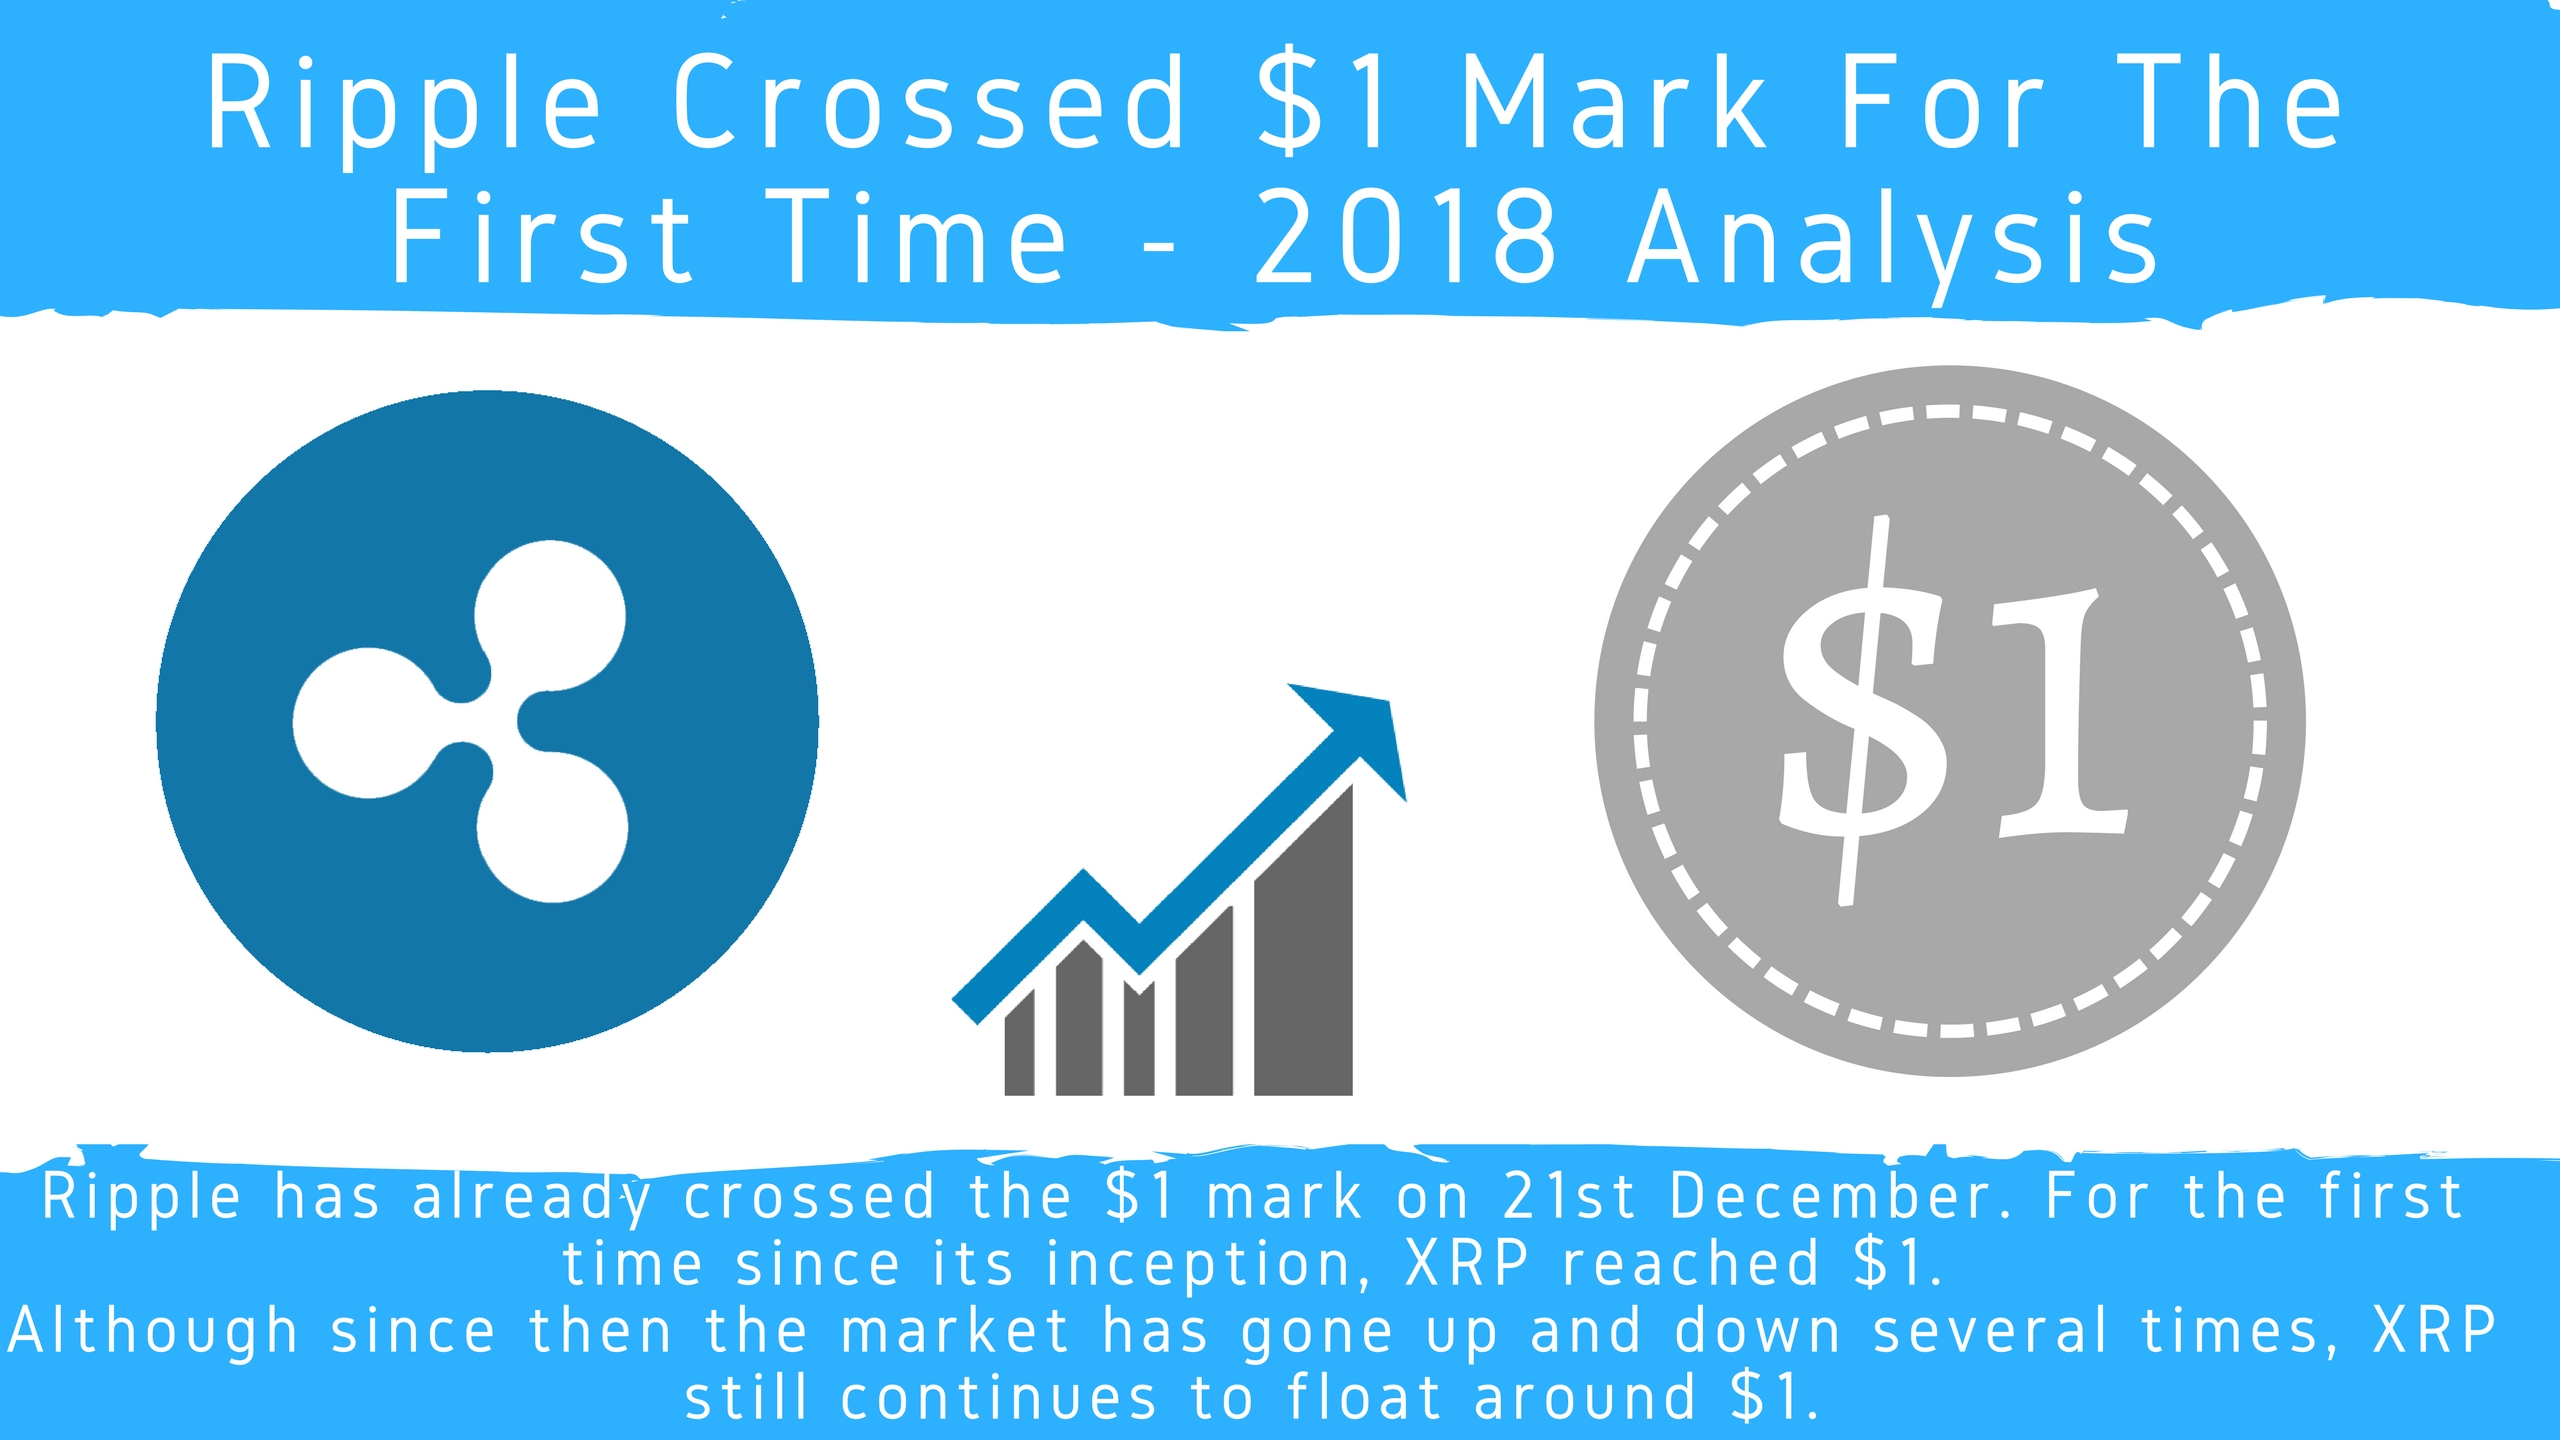 Ripple Crossed $1 Mark For The First Time – 2020 Analysis